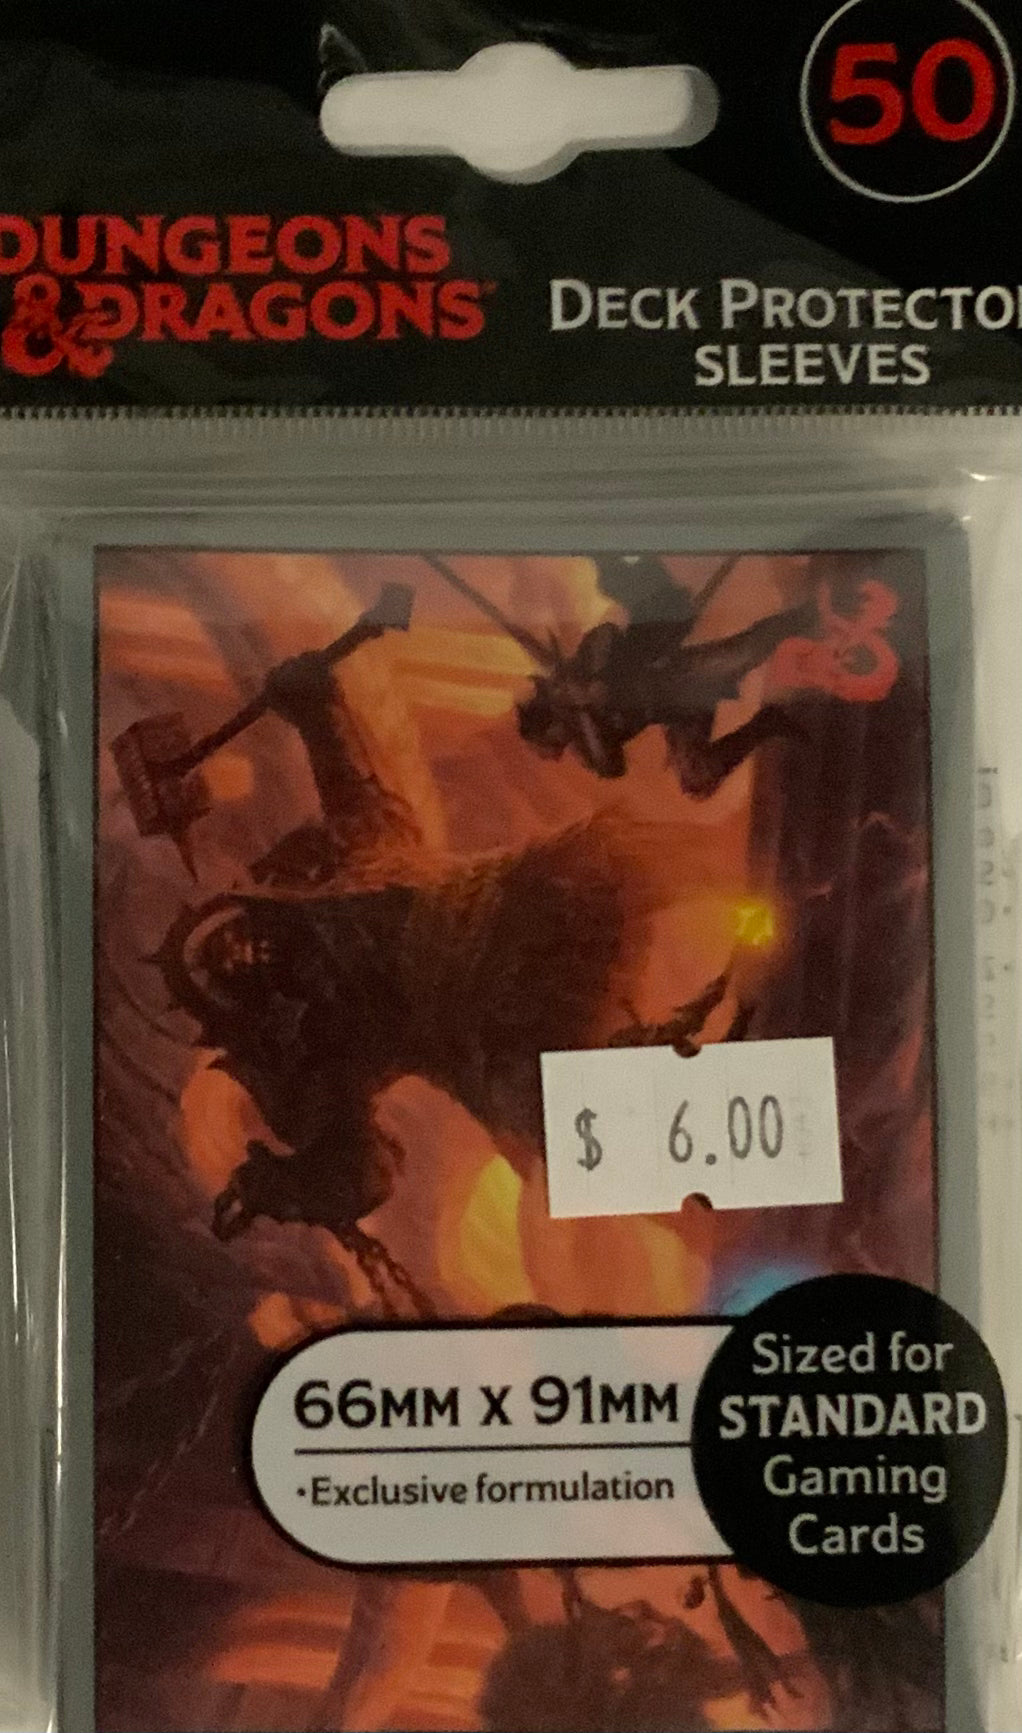 DND Deck Protector Sleeves